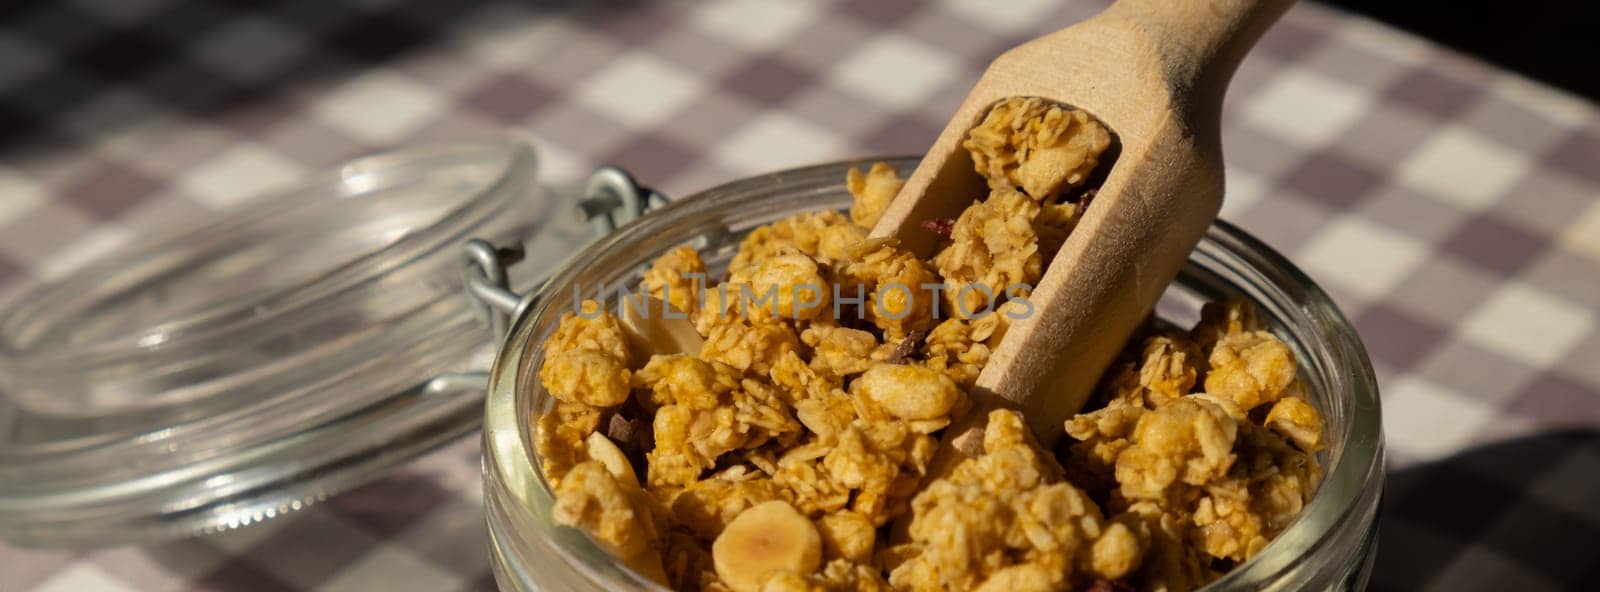 Homemade granola with nuts and seeds in eco glass jar. Healthy snack on breakfast. Granola, homemade muesli from oatmeal, raisins, honey, cranberry, flax, almond, macadamia, cashew, freshly baked